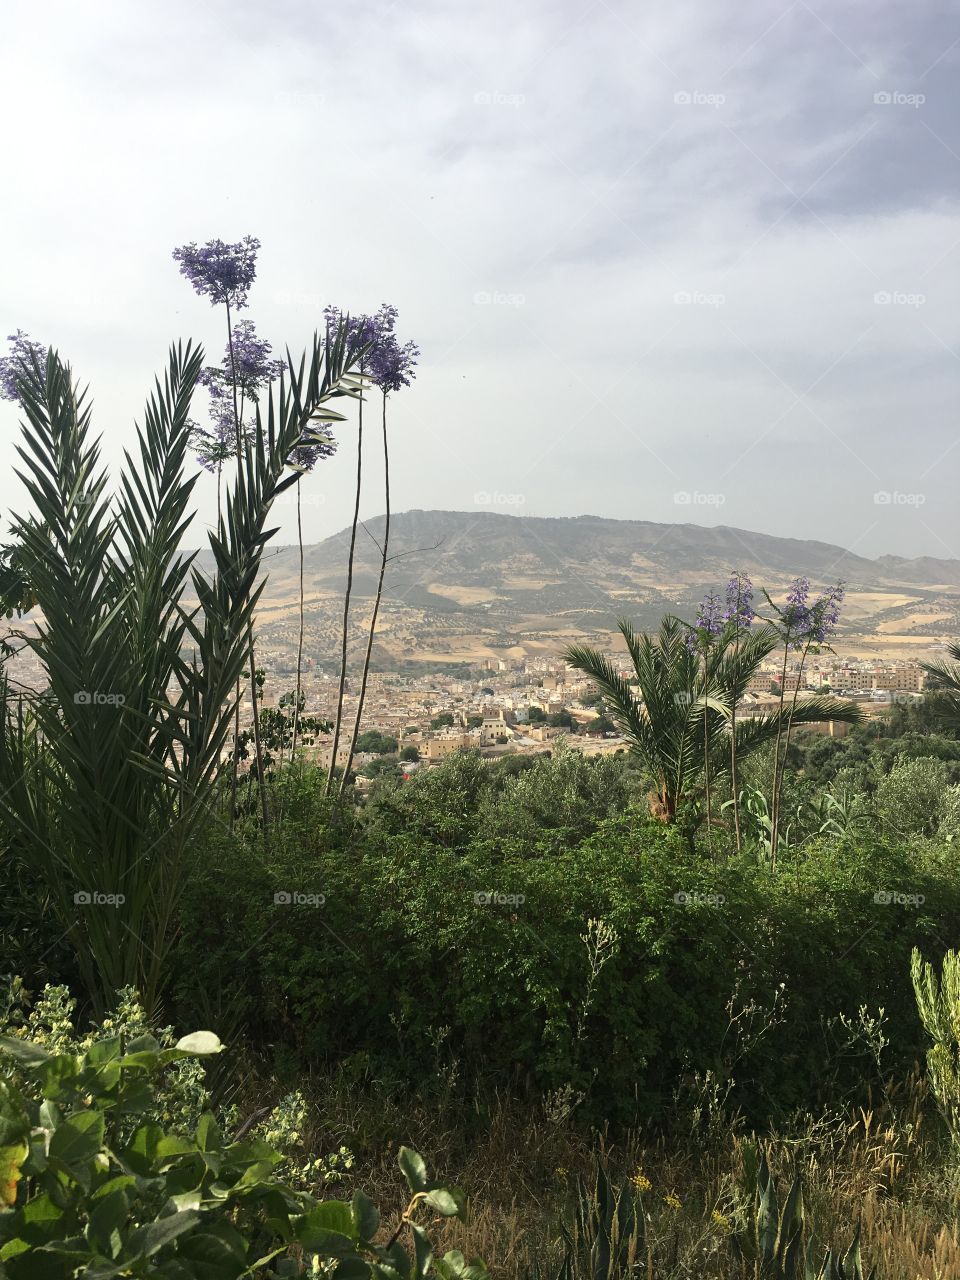 View of Fez from a beautiful sanctuary on the mountains overlooking the city. 